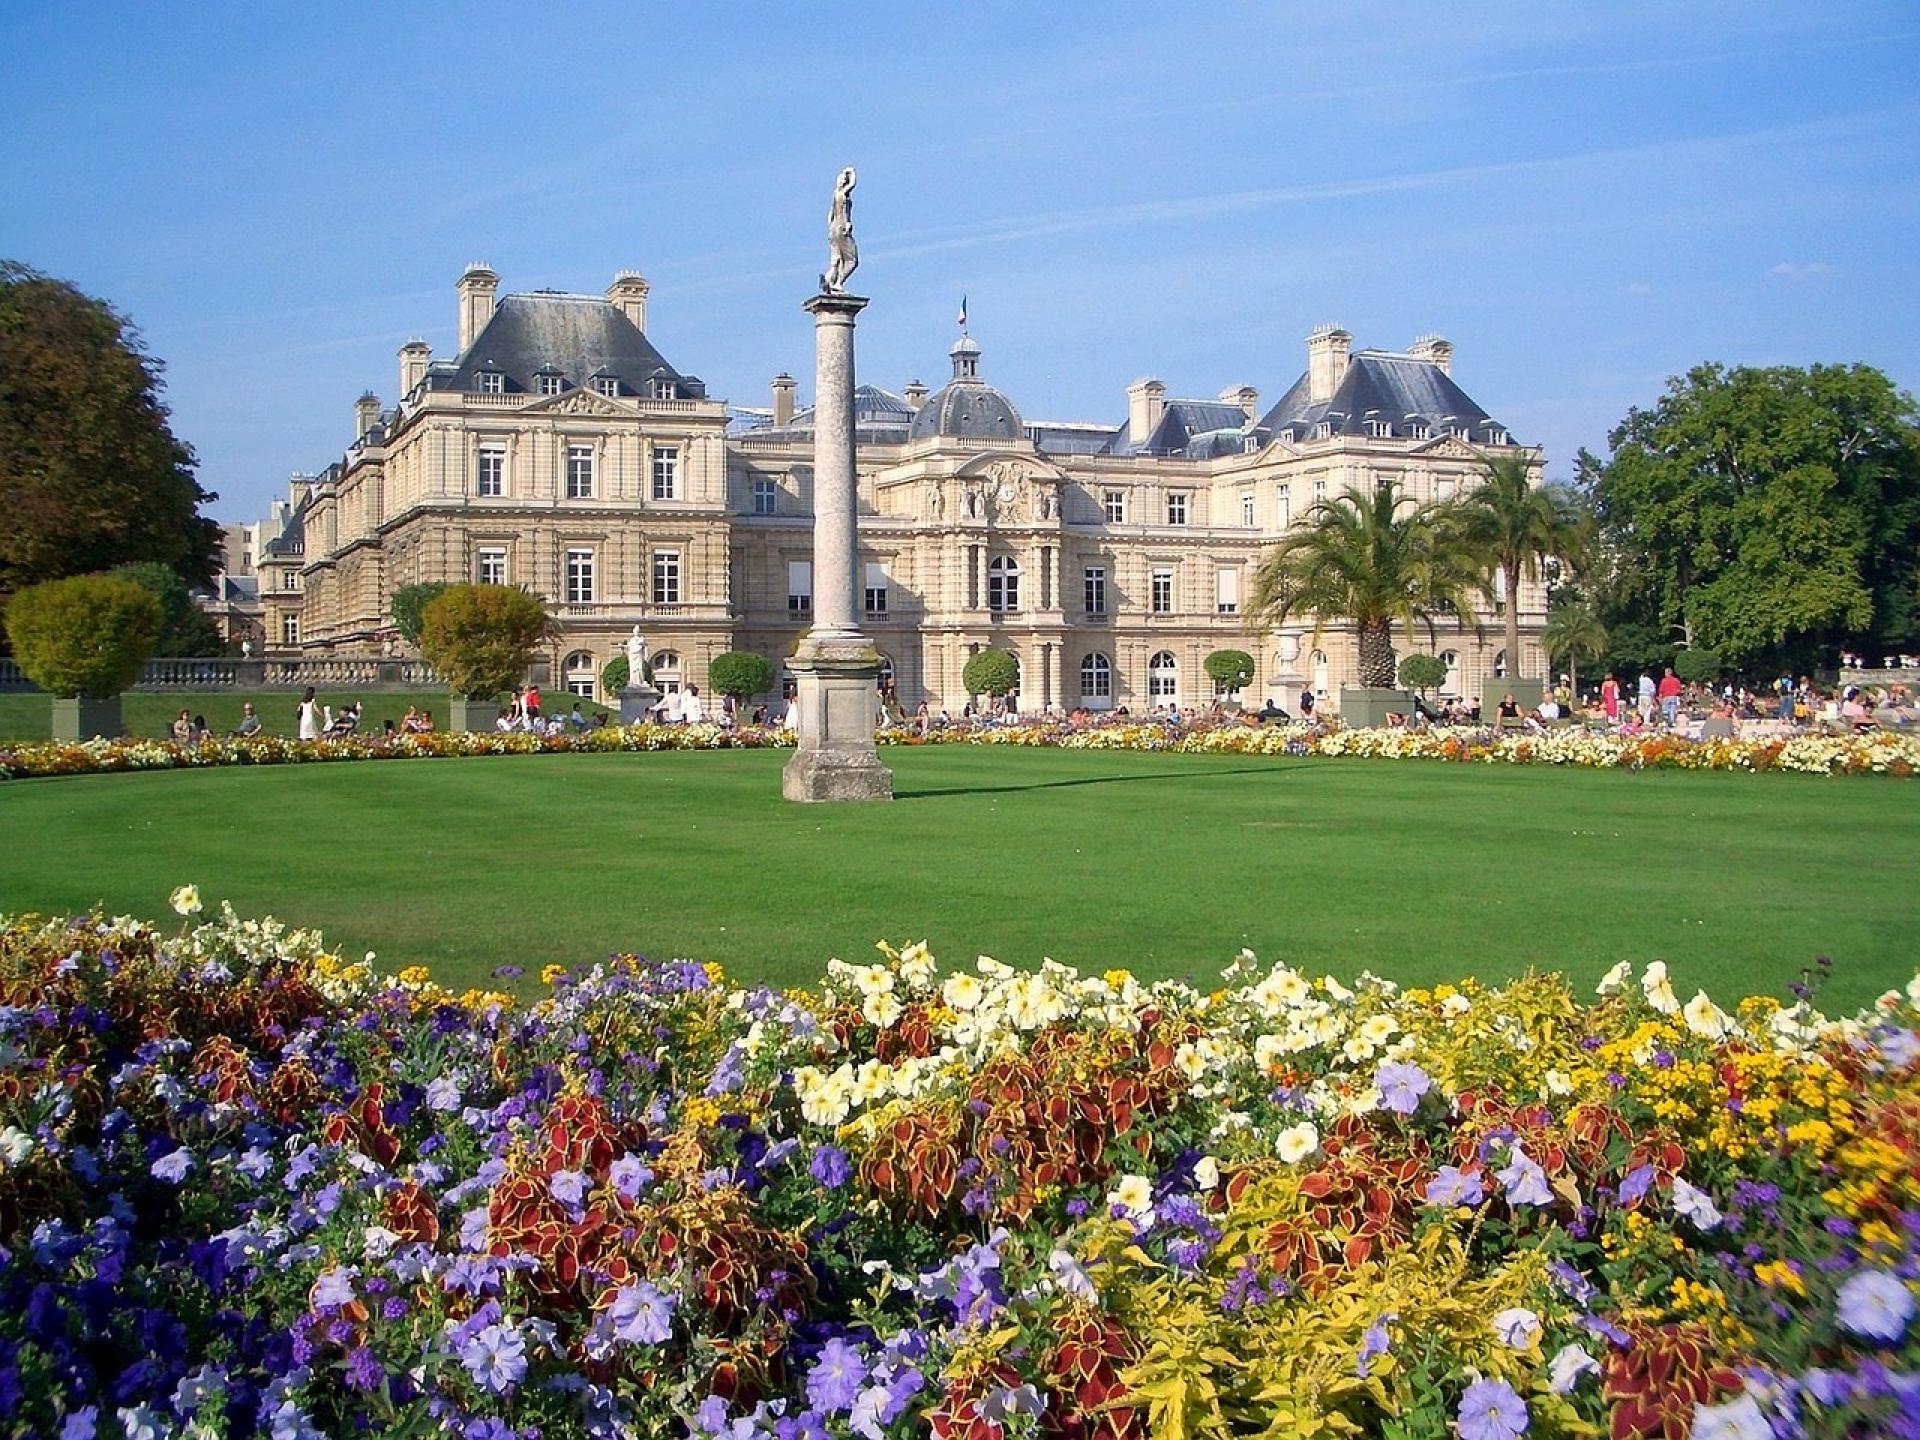 Sunny days are here again; time for a picnic in the Jardin du Luxembourg!